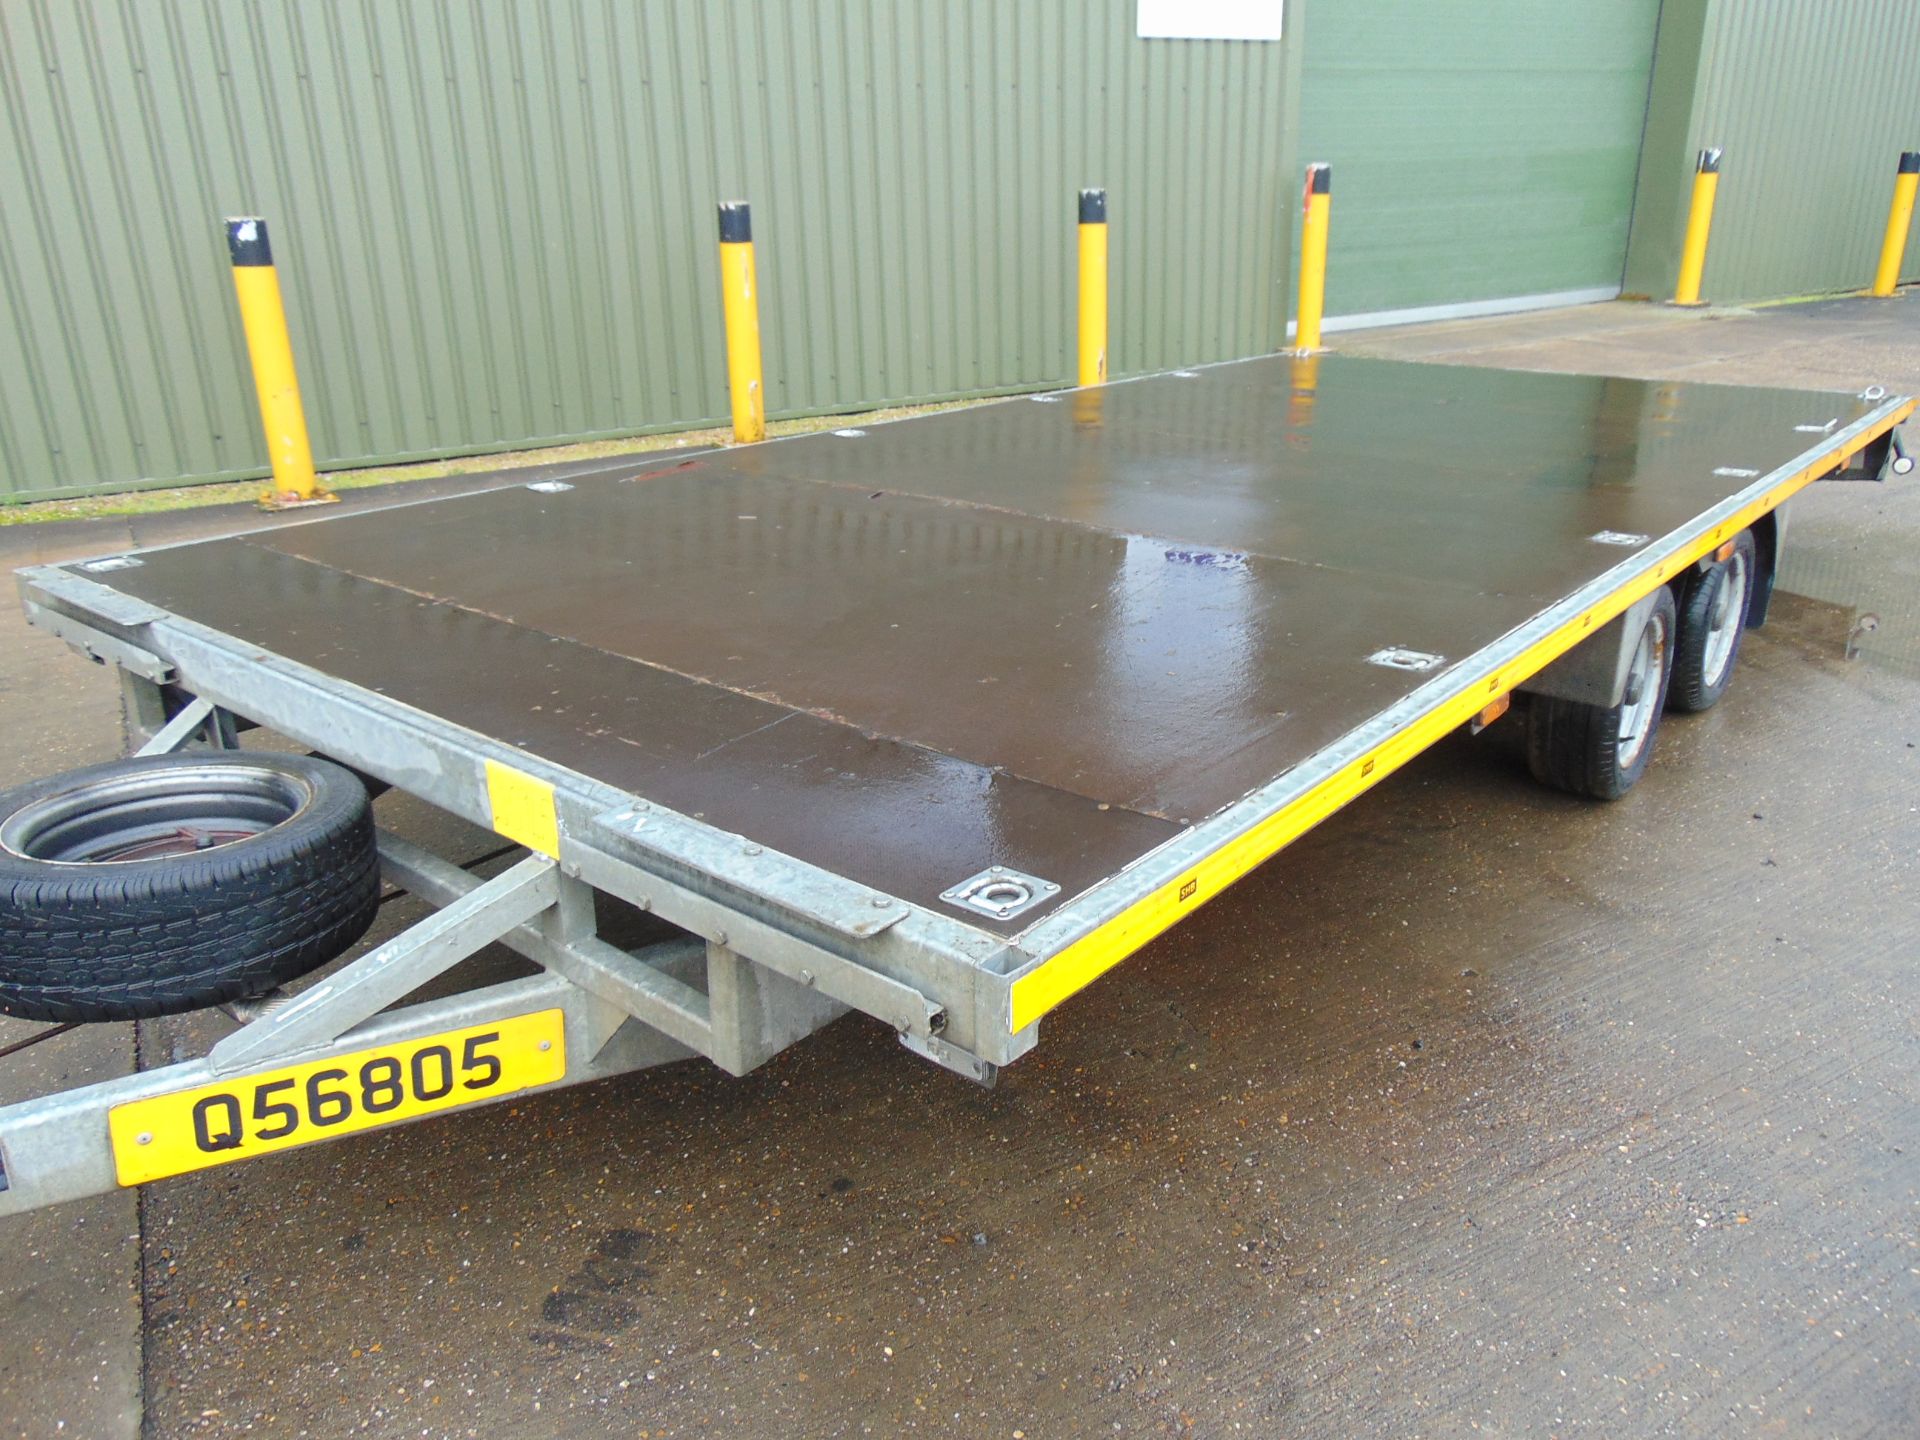 Bateson Twin Axle Flatbed 3.5 Tonne Transporter Trailer with Ramps bed dimensions L 5.8m x W 2.5m - Image 7 of 14